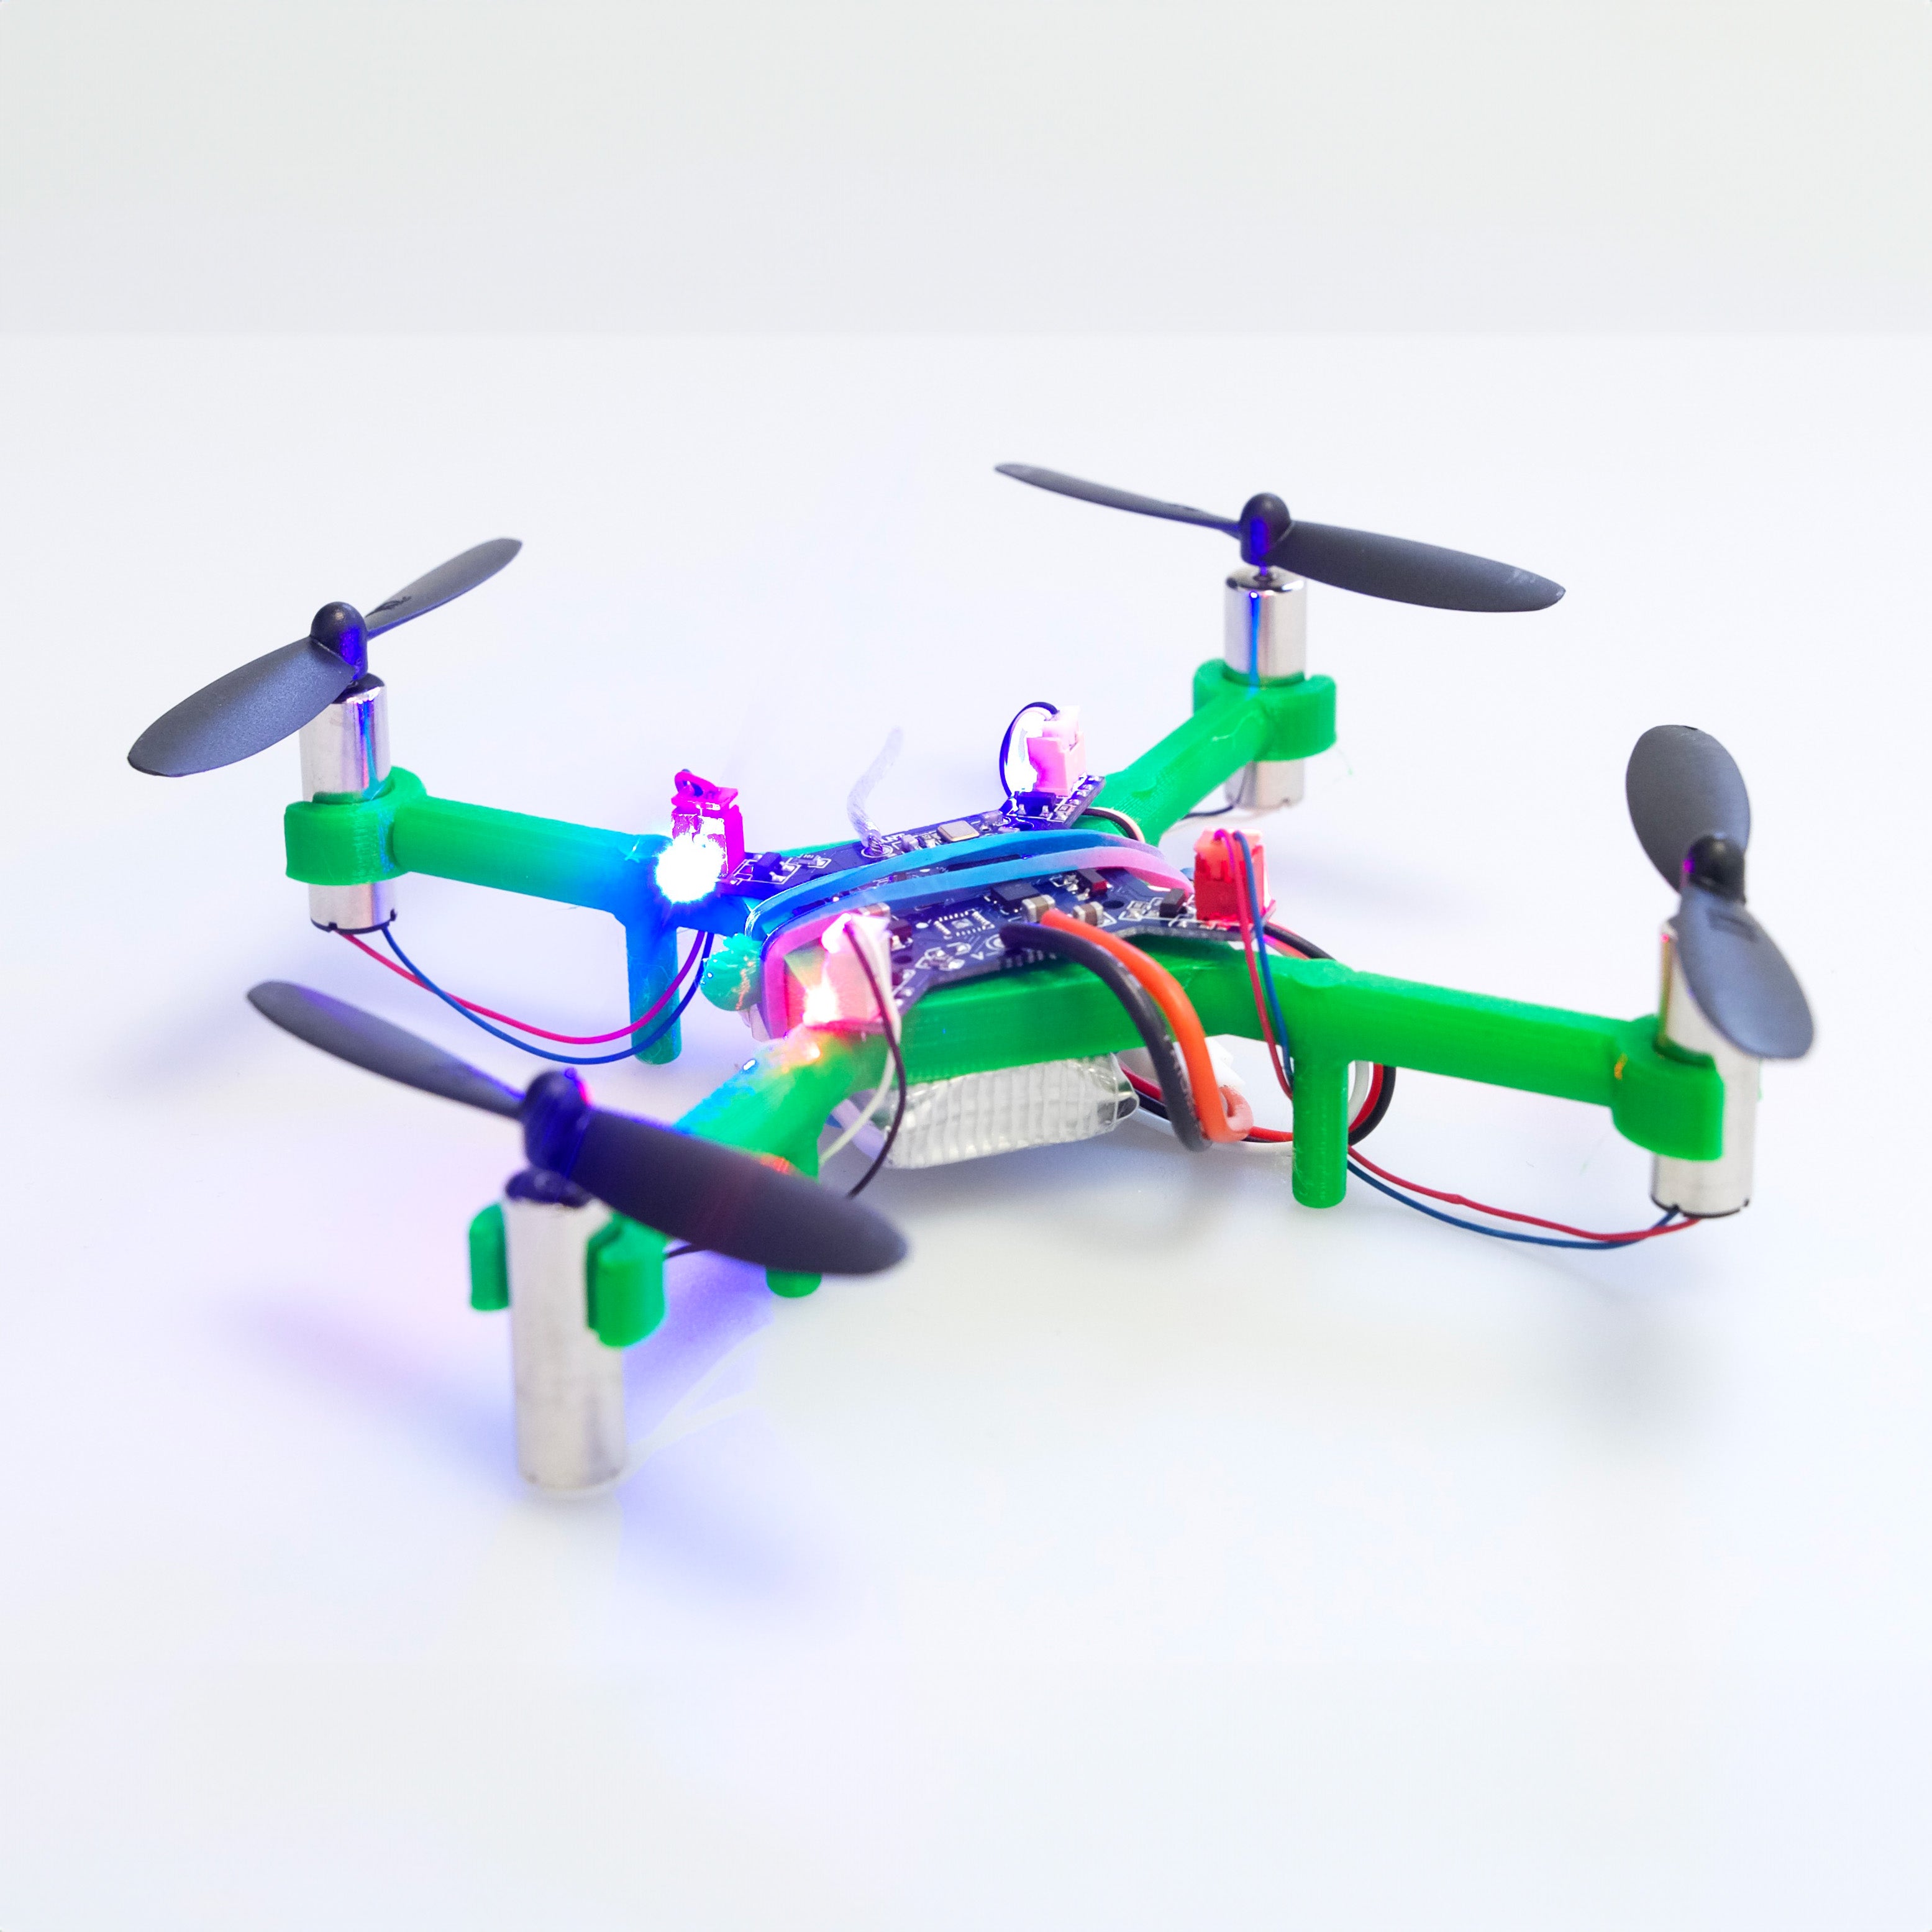 Hummingbird Makerspace Package: 6 hummingbird drone building kit, for laser cutter or 3D printer